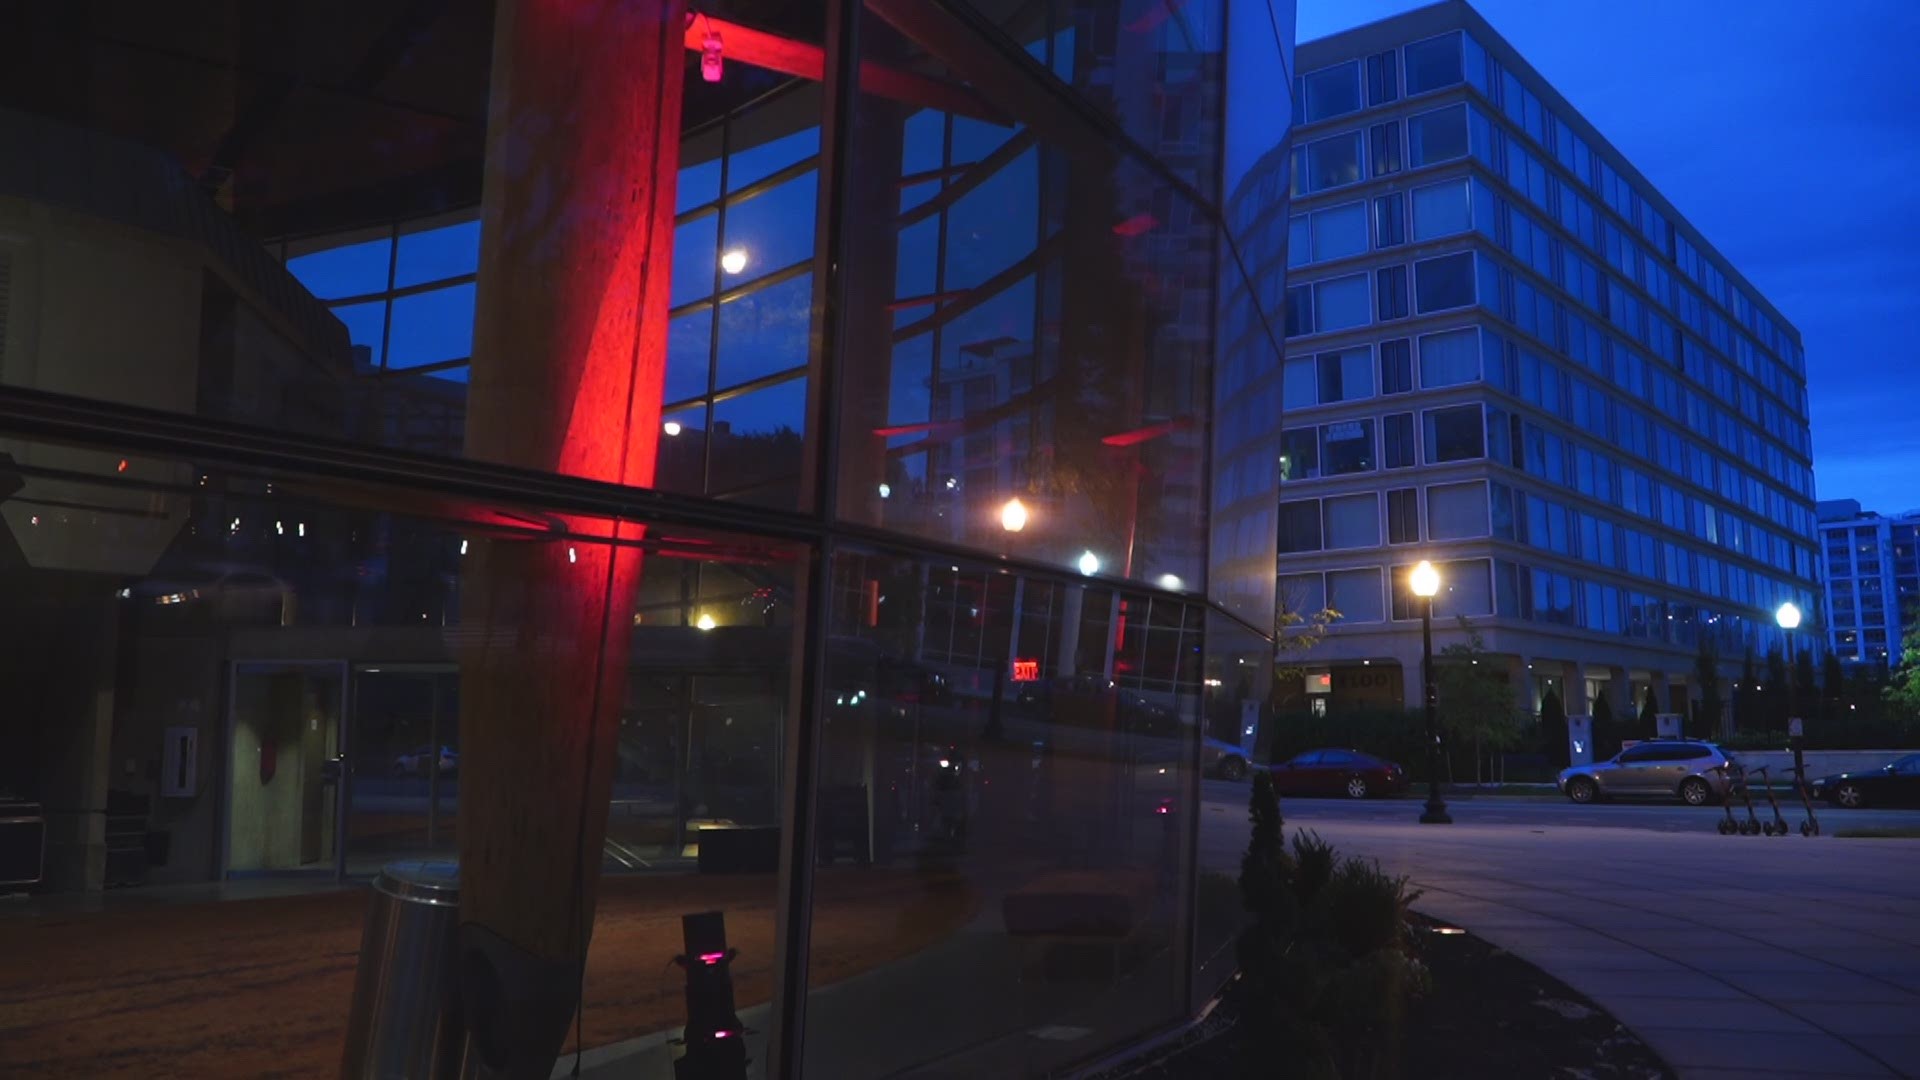 DMV venues from the Washington National Cathedral to Arena Stage lit up in red to signal a red alert, to their need for funding from Congress to survive the pandemic